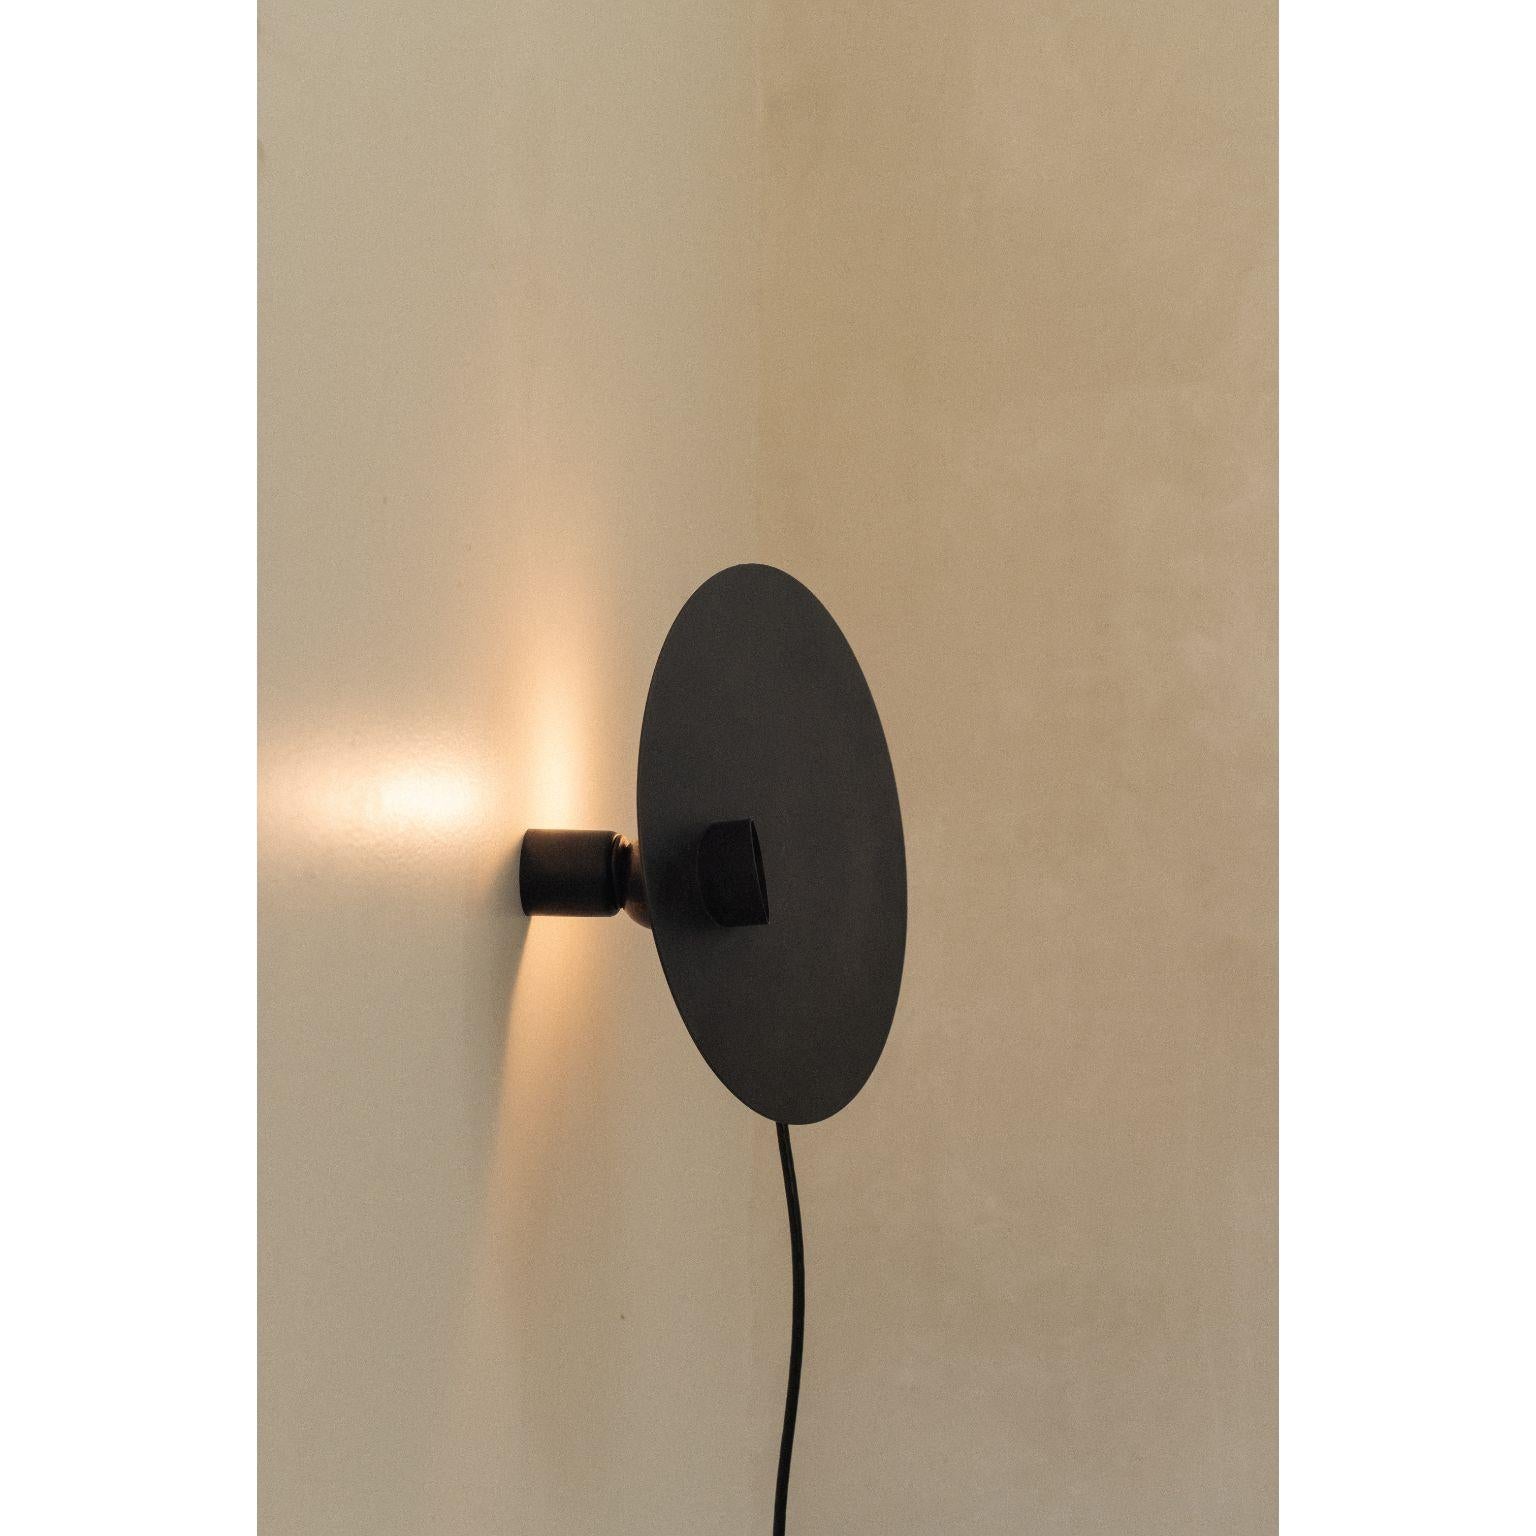 Attraction Sconce by Nick Pourfard
Dimensions: Ø 28 x H 8 cm.
Materials: metal, magnets.
Different finishes available. Please contact us.

All our lamps can be wired according to each country. If sold to the USA it will be wired for the USA for